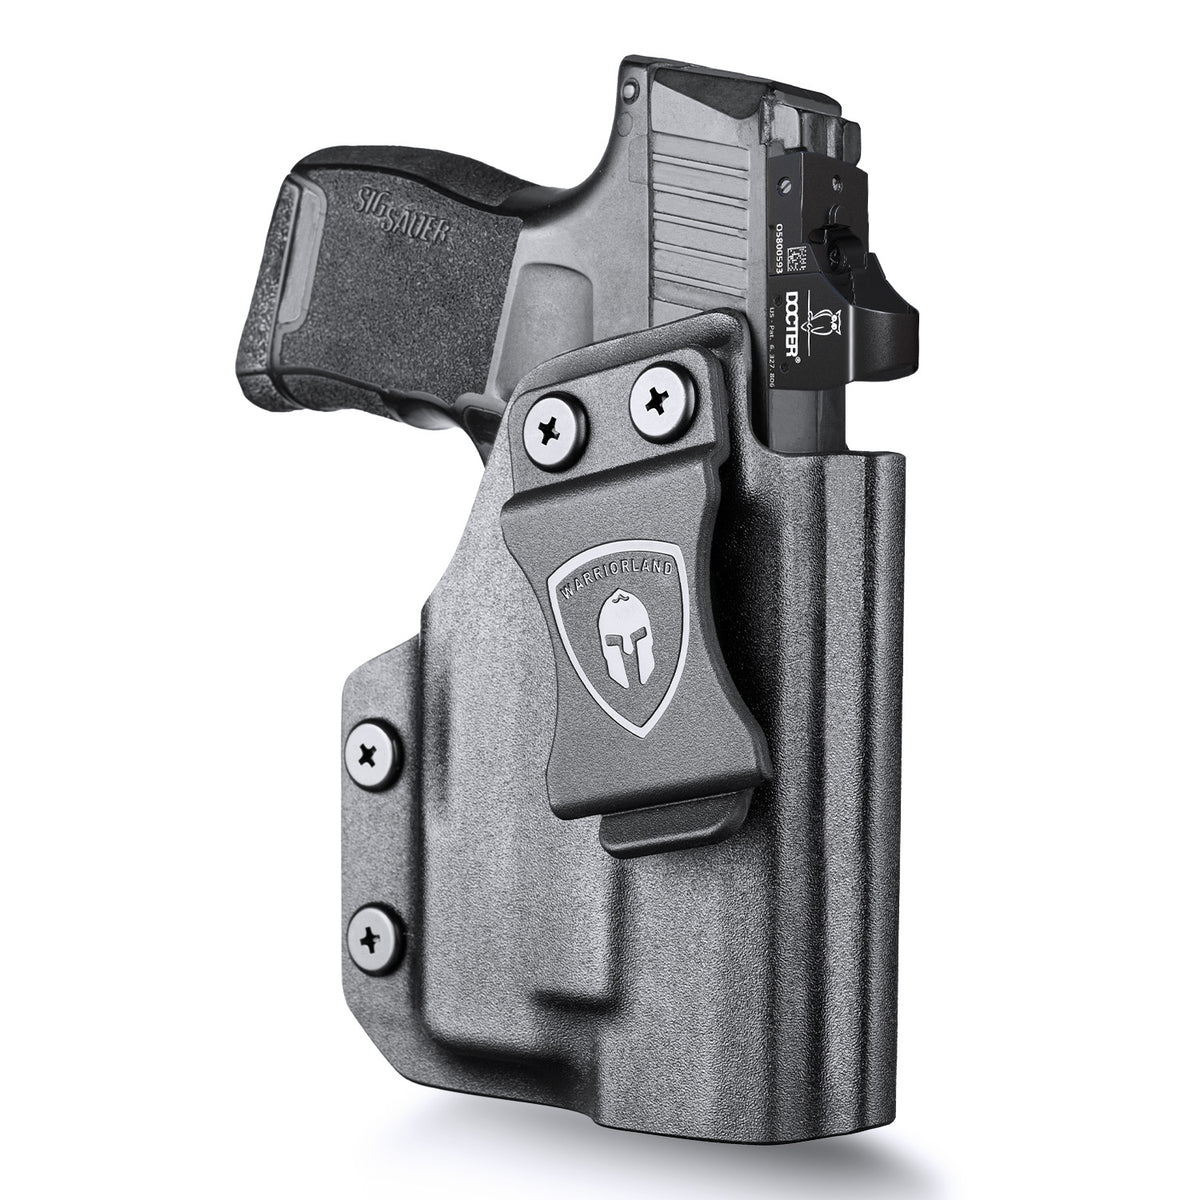 P365 TLR6 Holster IWB Kydex Holster Optic Cut Fit P365/P365X/P365 SAS/P365XL w/TLR-6, Inside Waistband Concealed Carry Holster, Adj. Cant & Retention, Right Hand|WARRIORLAND